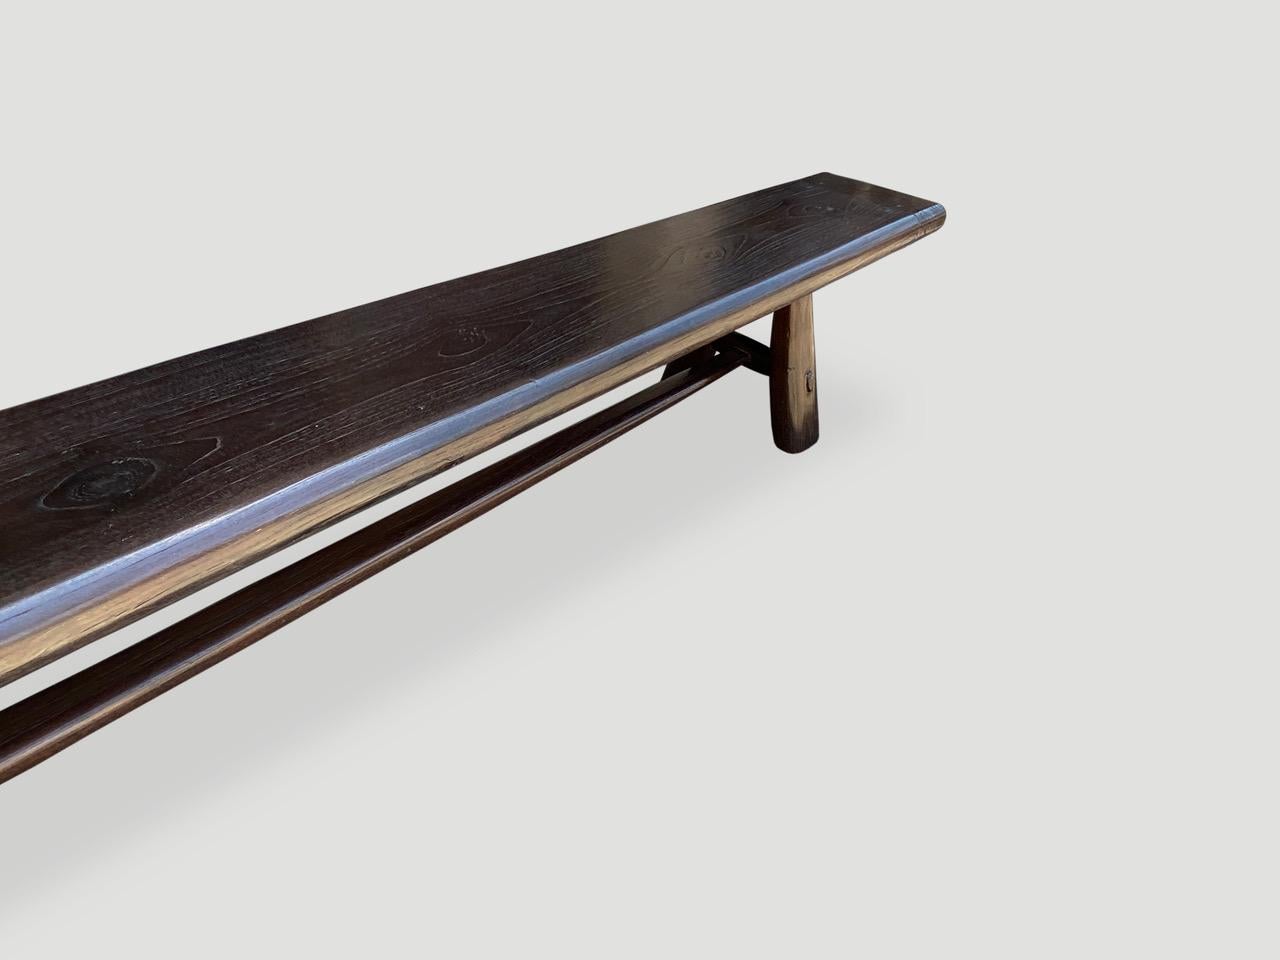 Introducing the midcentury Couture collection new to 2021. Furniture constructed by hand from start to finish. A long Minimalist bench made from a single three inch slab of reclaimed teak wood taken from my finest collection. Hand carved with smooth